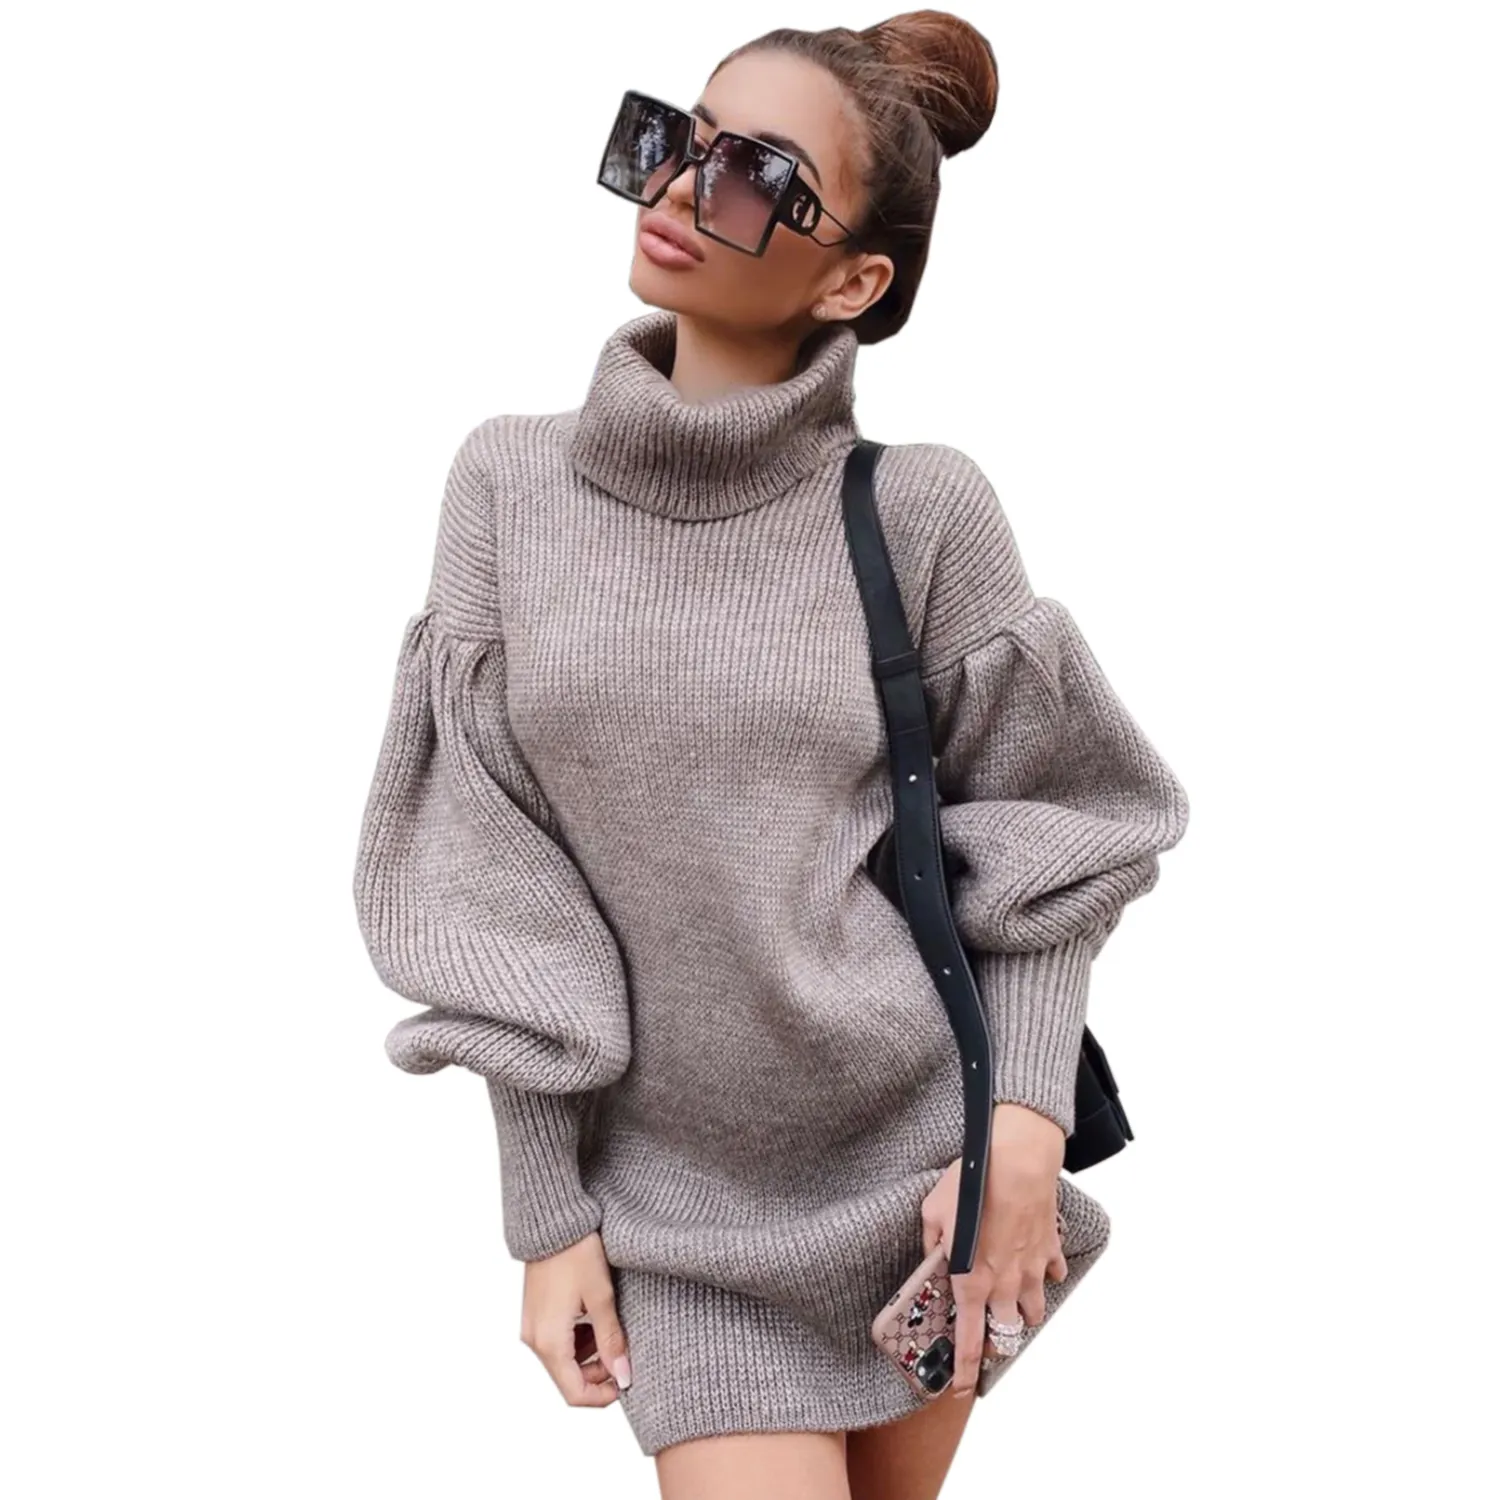 Classic Casual Turtleneck Long Lantern Sleeve Well Knitted Sweater Dress for Women